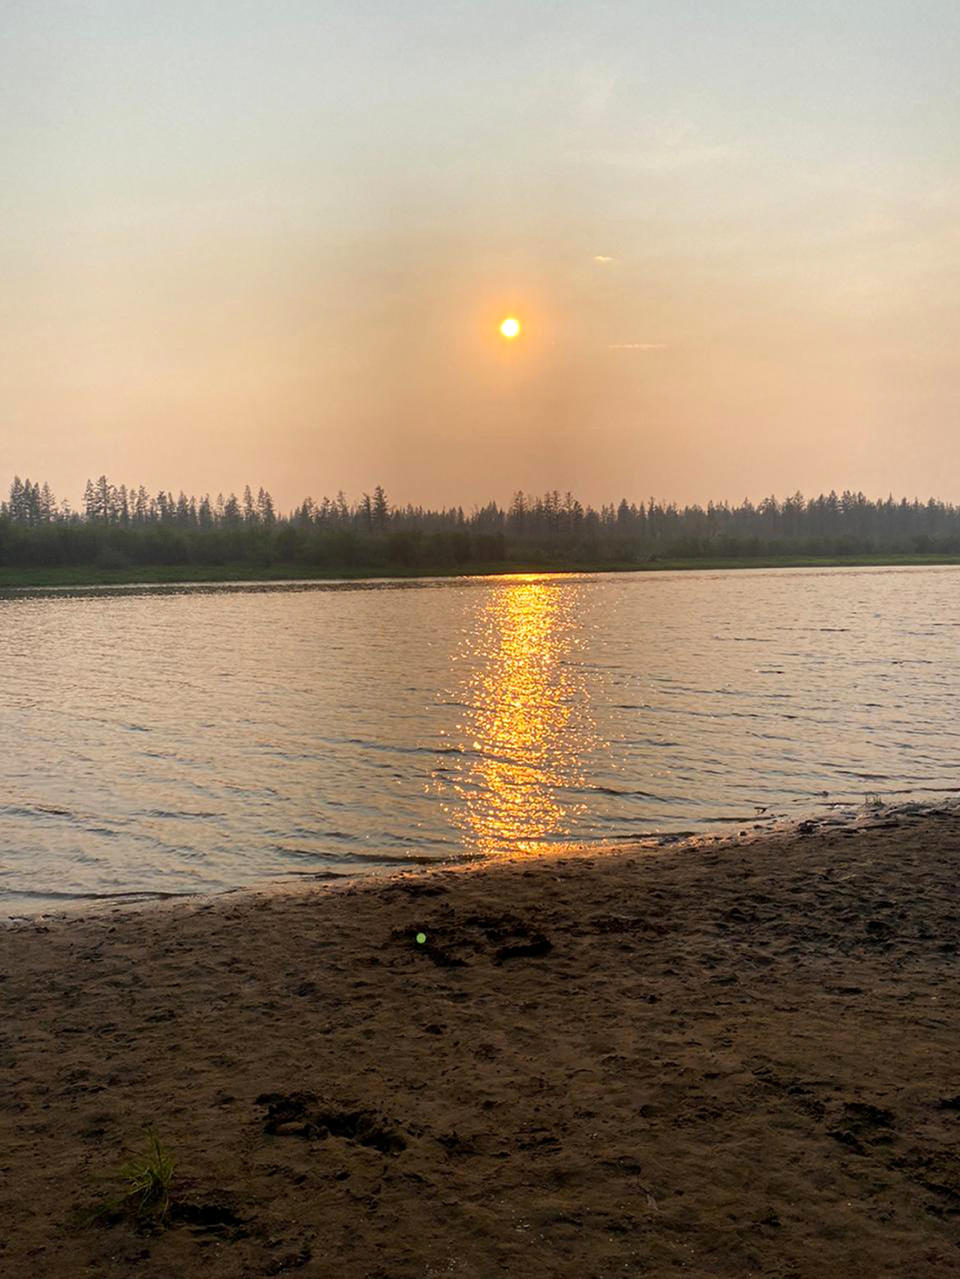 In this handout photo taken Tuesday, June 23, 2020 and provided by Olga Burtseva, a beach on the bank of Yana river is empty due to hot weather, during sunset outside Verkhoyansk, the Sakha Republic, about 4660 kilometers (2900 miles) northeast of Moscow, Russia. A record-breaking temperature of 38 degrees Celsius (100.4 degrees Fahrenheit) was registered in the Arctic town of Verkhoyansk on Saturday, June 20 in a prolonged heatwave that has alarmed scientists around the world. (Olga Burtseva via AP)